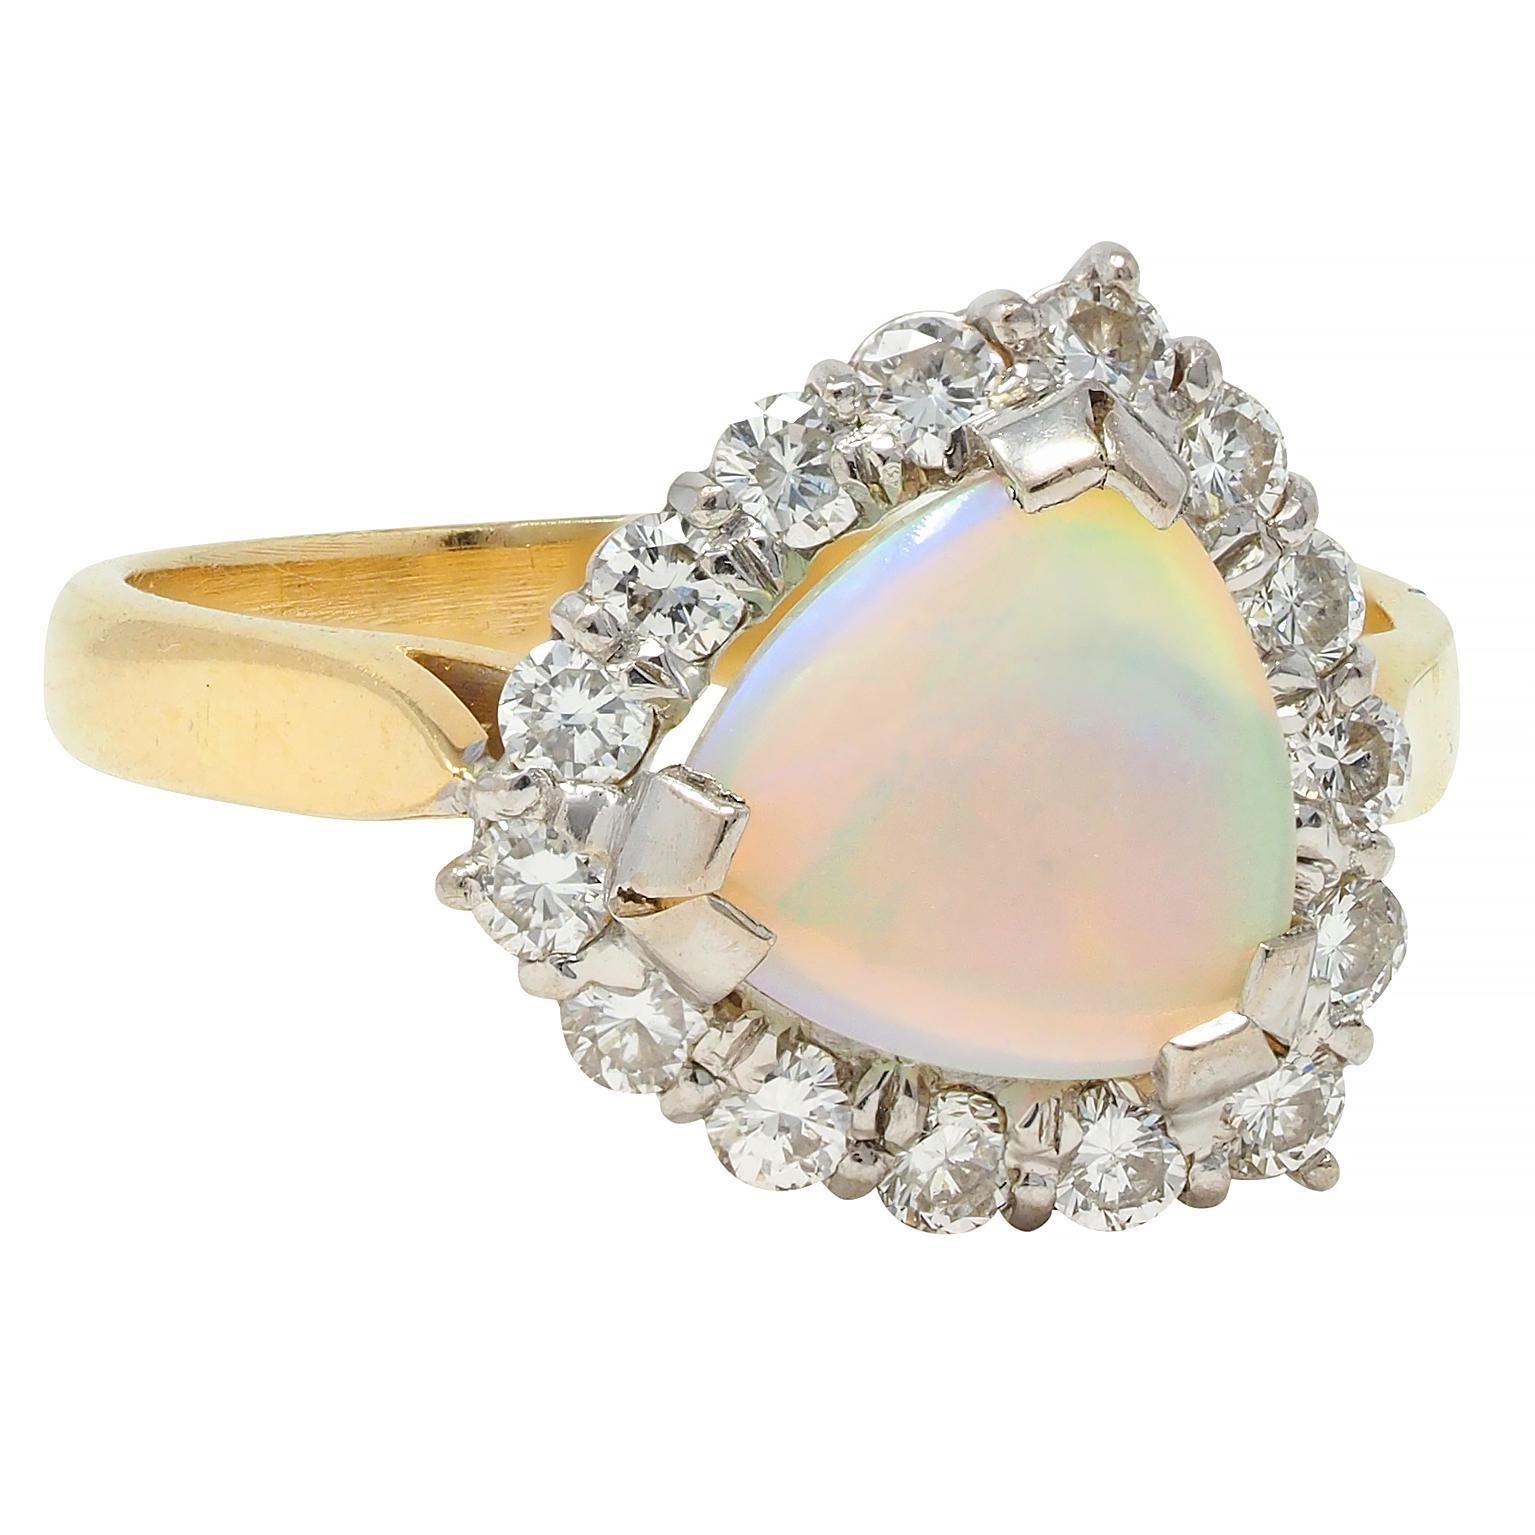 Centering a triangle-shaped opal cabochon measuring 8.0 x 8.0 mm 
Translucent white in body color with spectral play-of-color
Prong set in white gold head with halo surround 
Comprised of prong set round brilliant cut diamonds
Weighing approximately